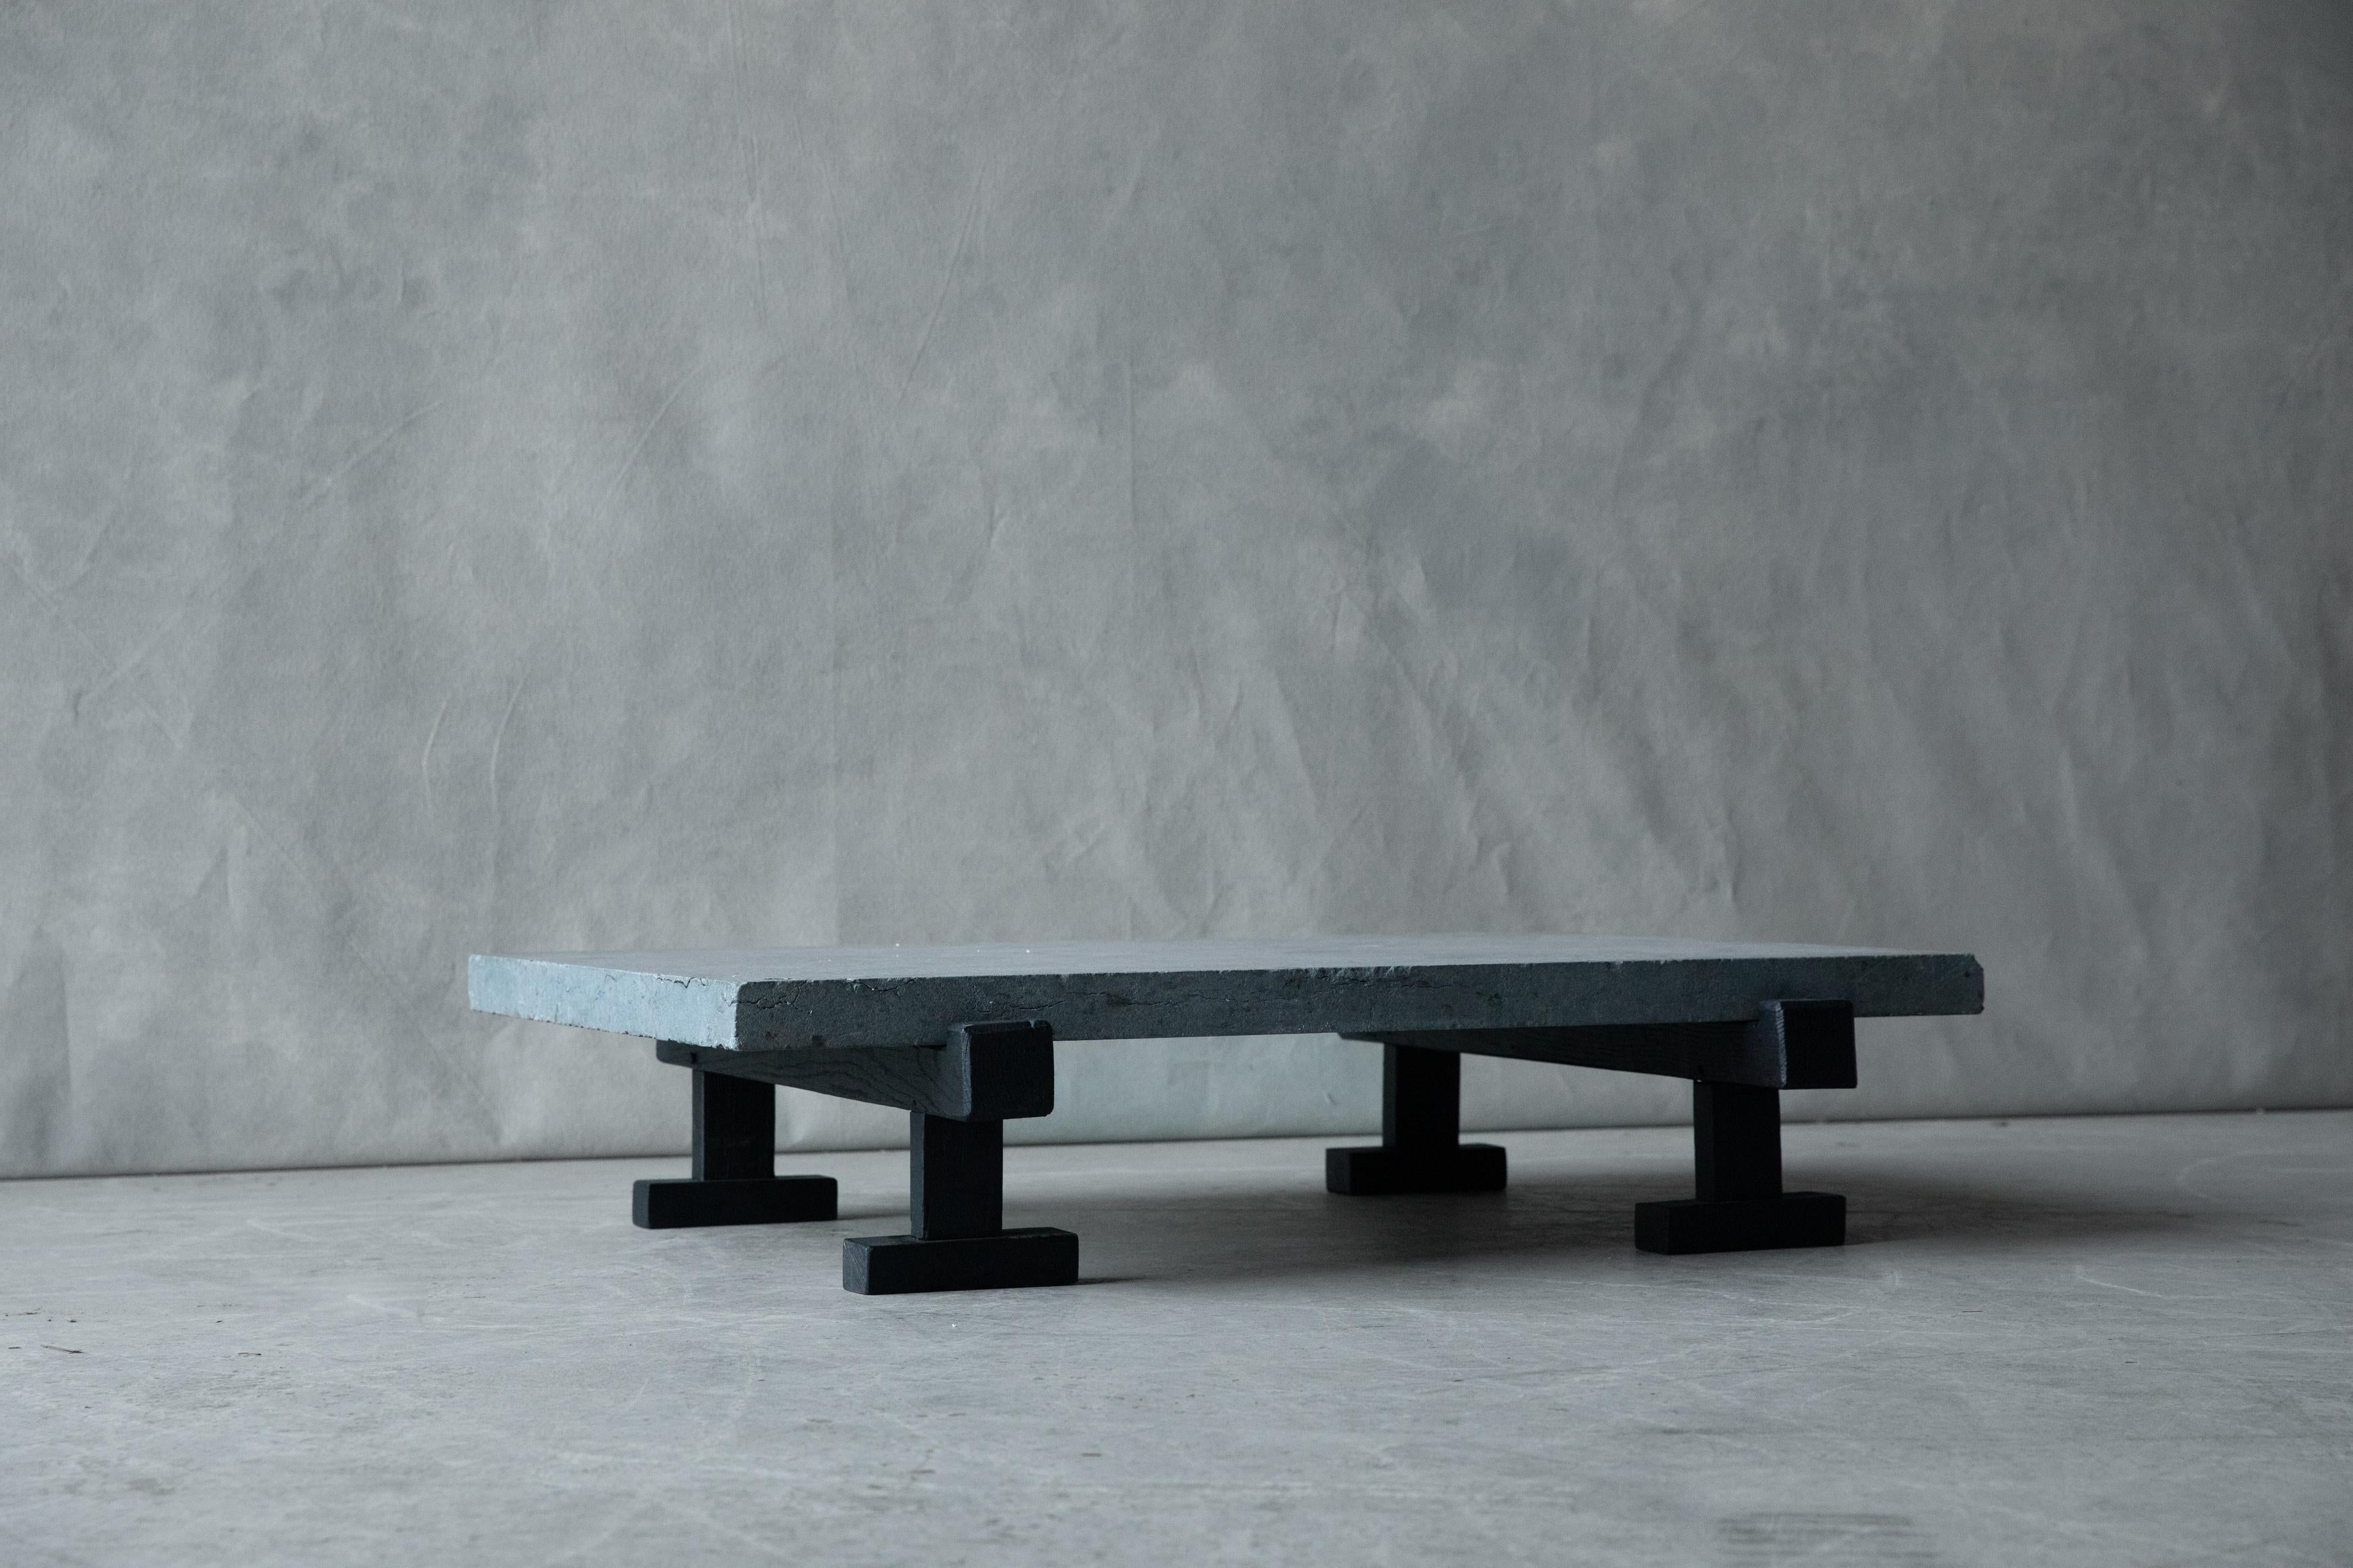 Vintage slate coffee table from France, circa 1900.

We don't have the time to write an extensive description on each of our pieces. We prefer to speak directly with our clients. So, If you have any questions or would like to know more please give